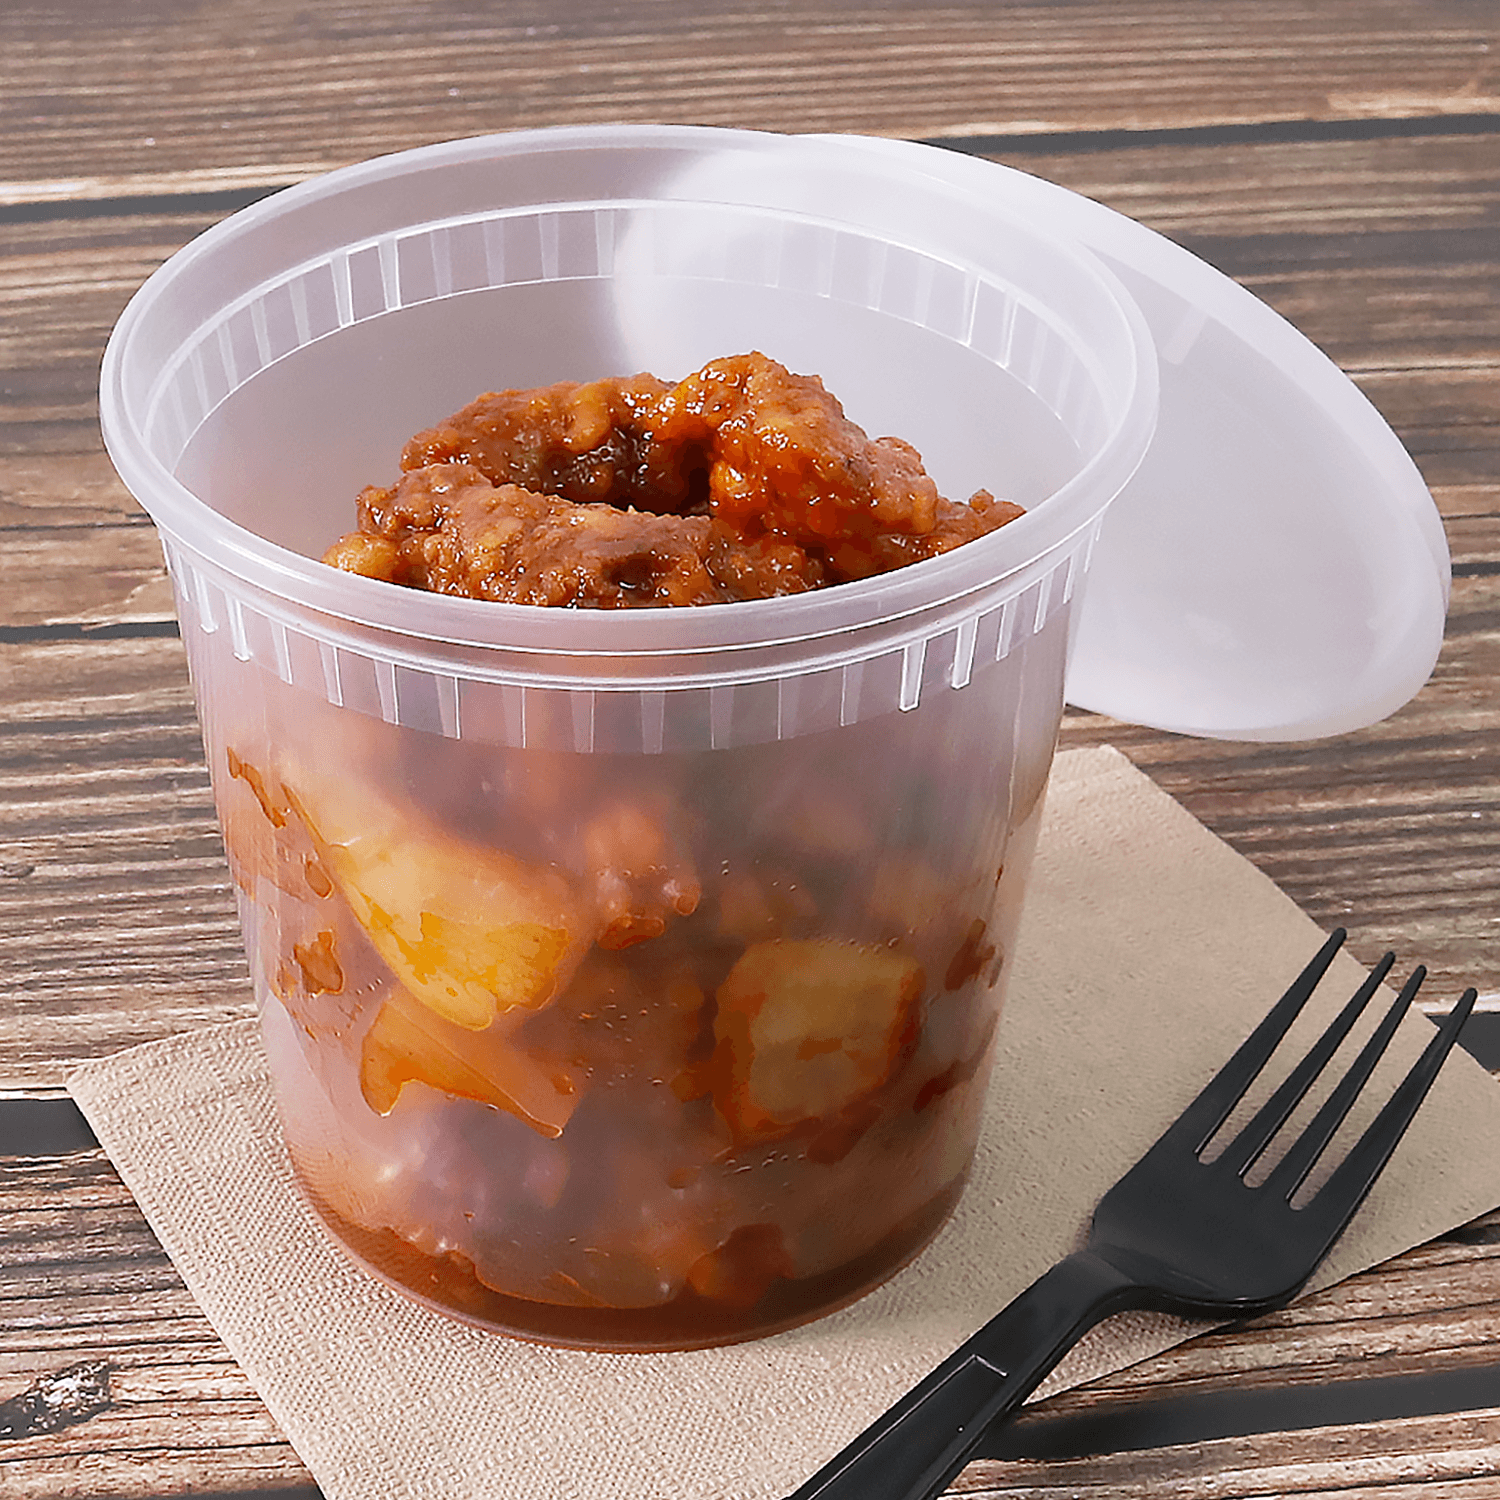 Karat 24oz PP Plastic Injection Molded Deli Containers & Lids with orange chicken